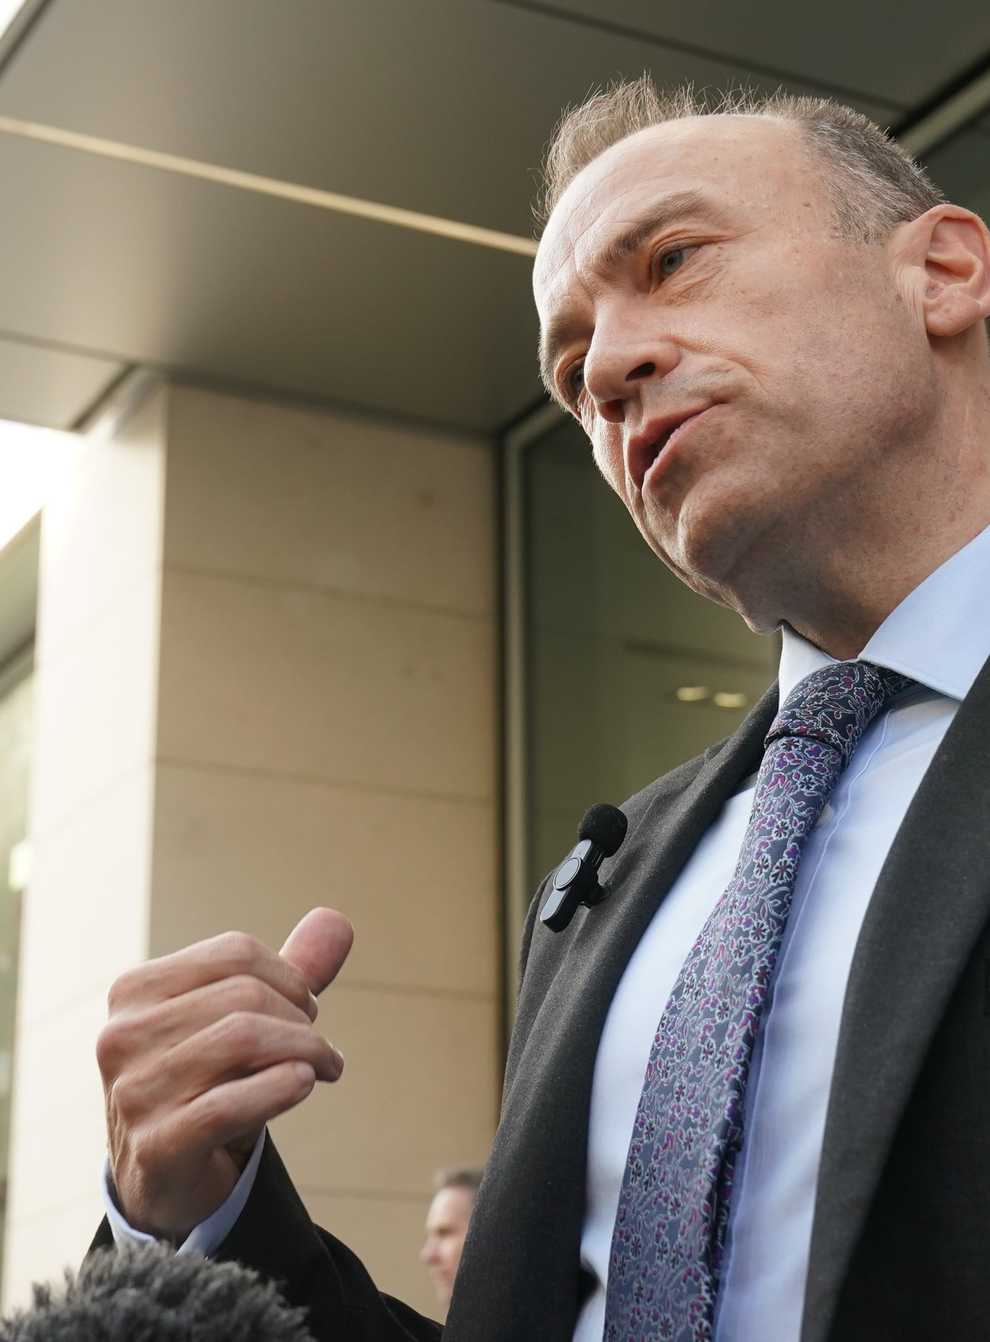 Northern Ireland Secretary Chris Heaton-Harris has said someone has spread a fake email about him, claiming he was resigning (Brian Lawless/PA Wire)